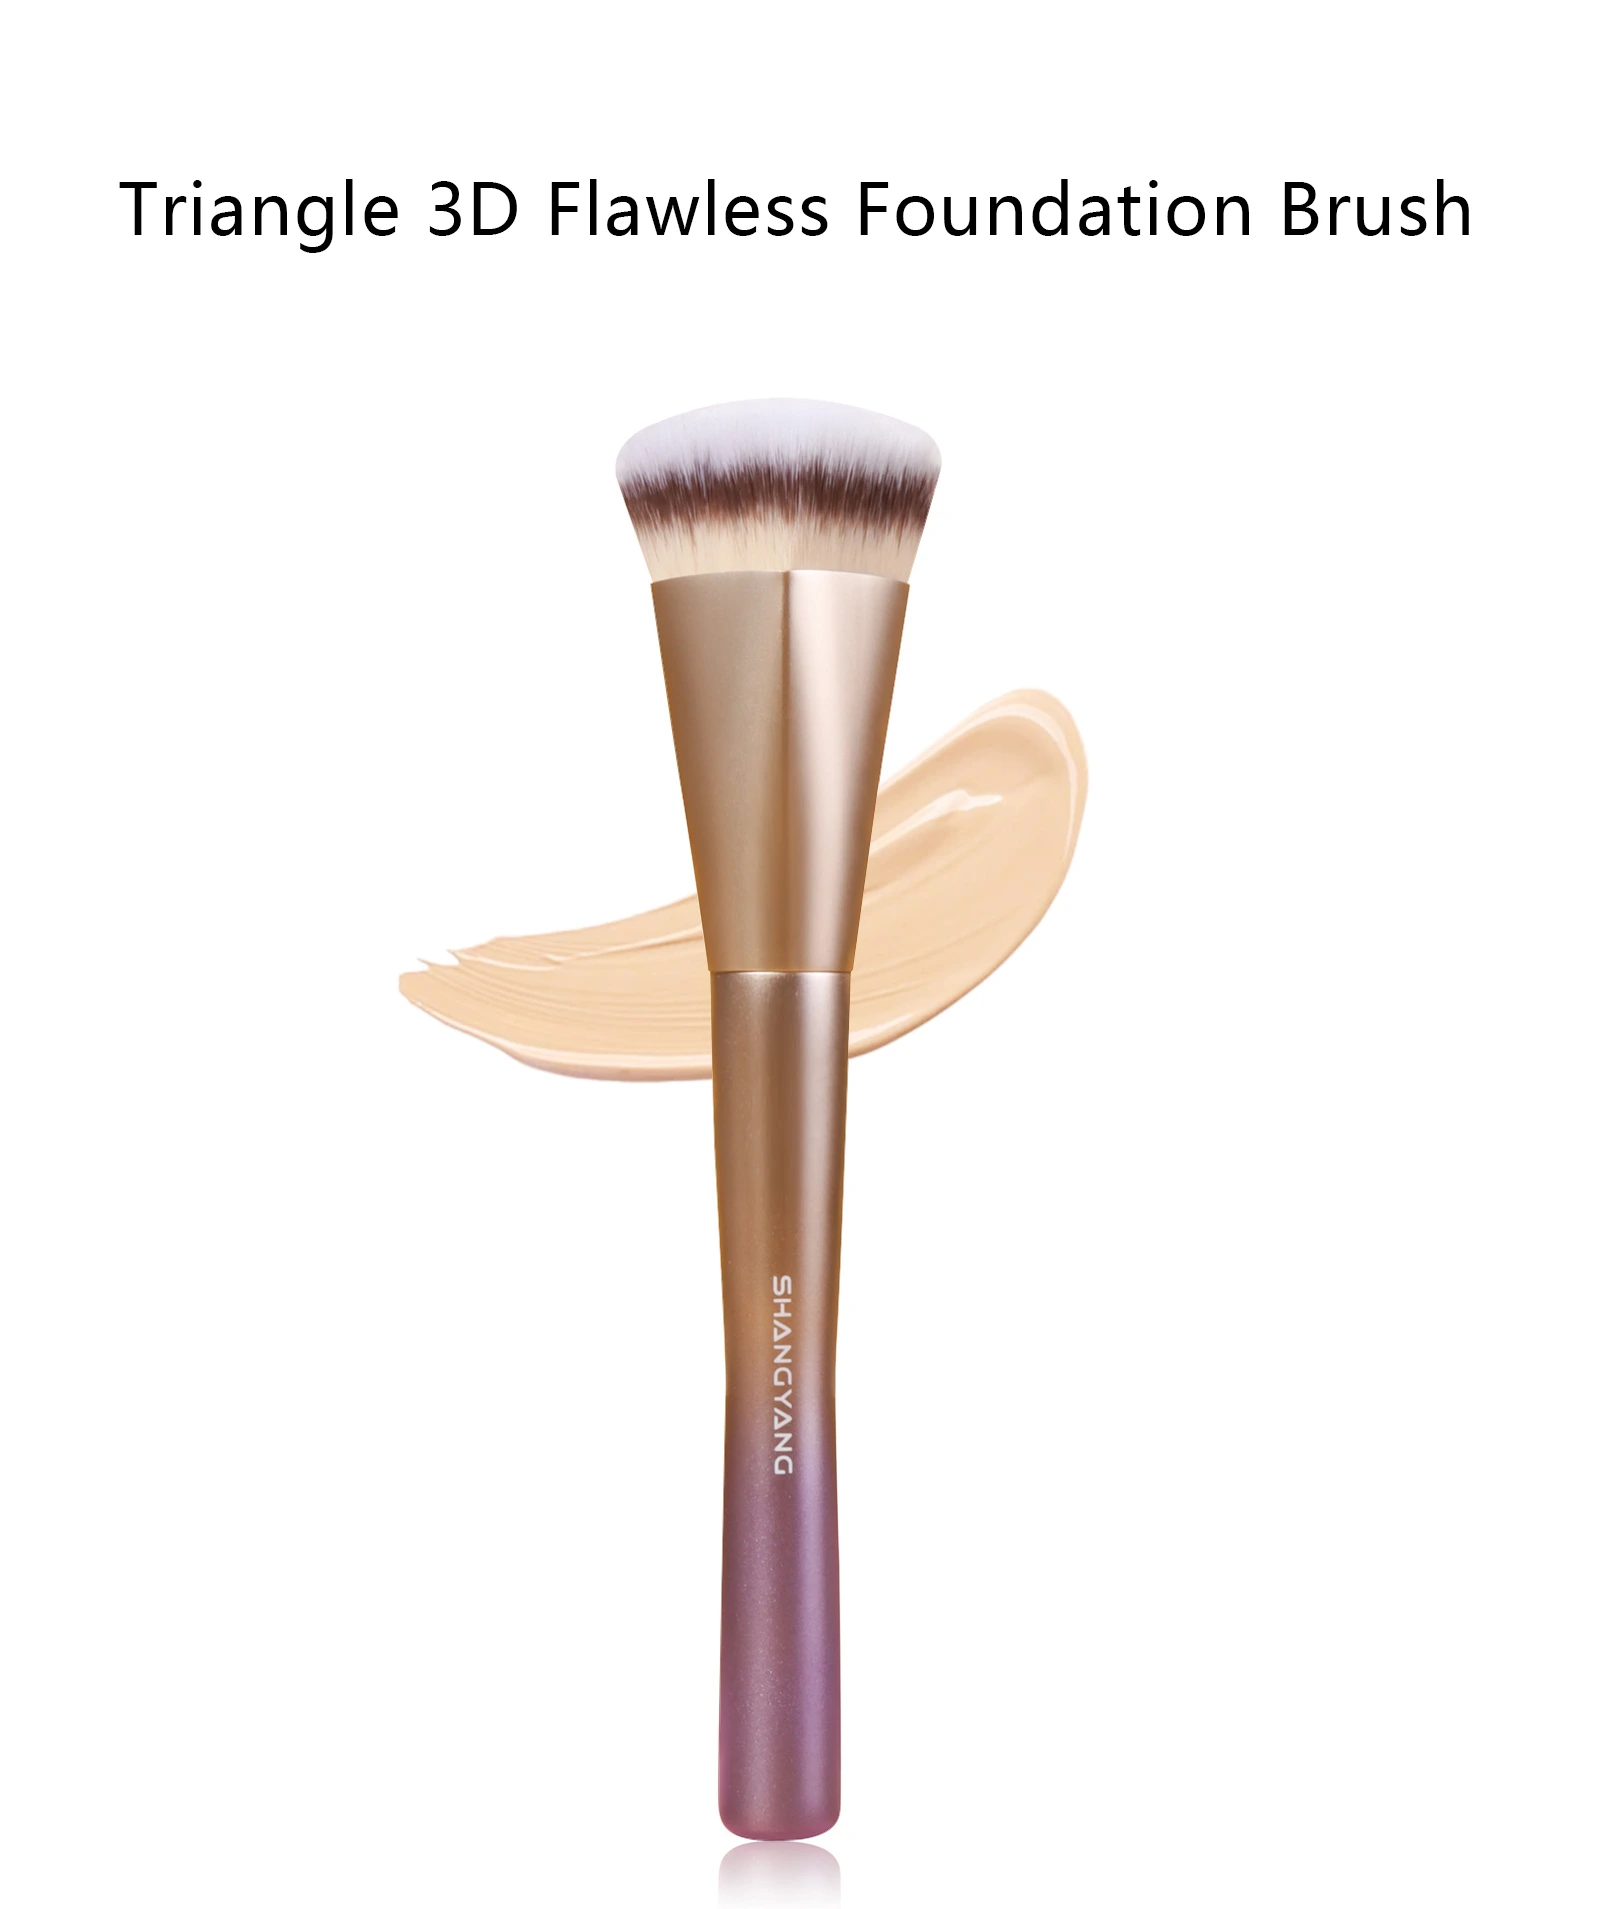 Pincel Triangle 3D Flawless Foundation Brush